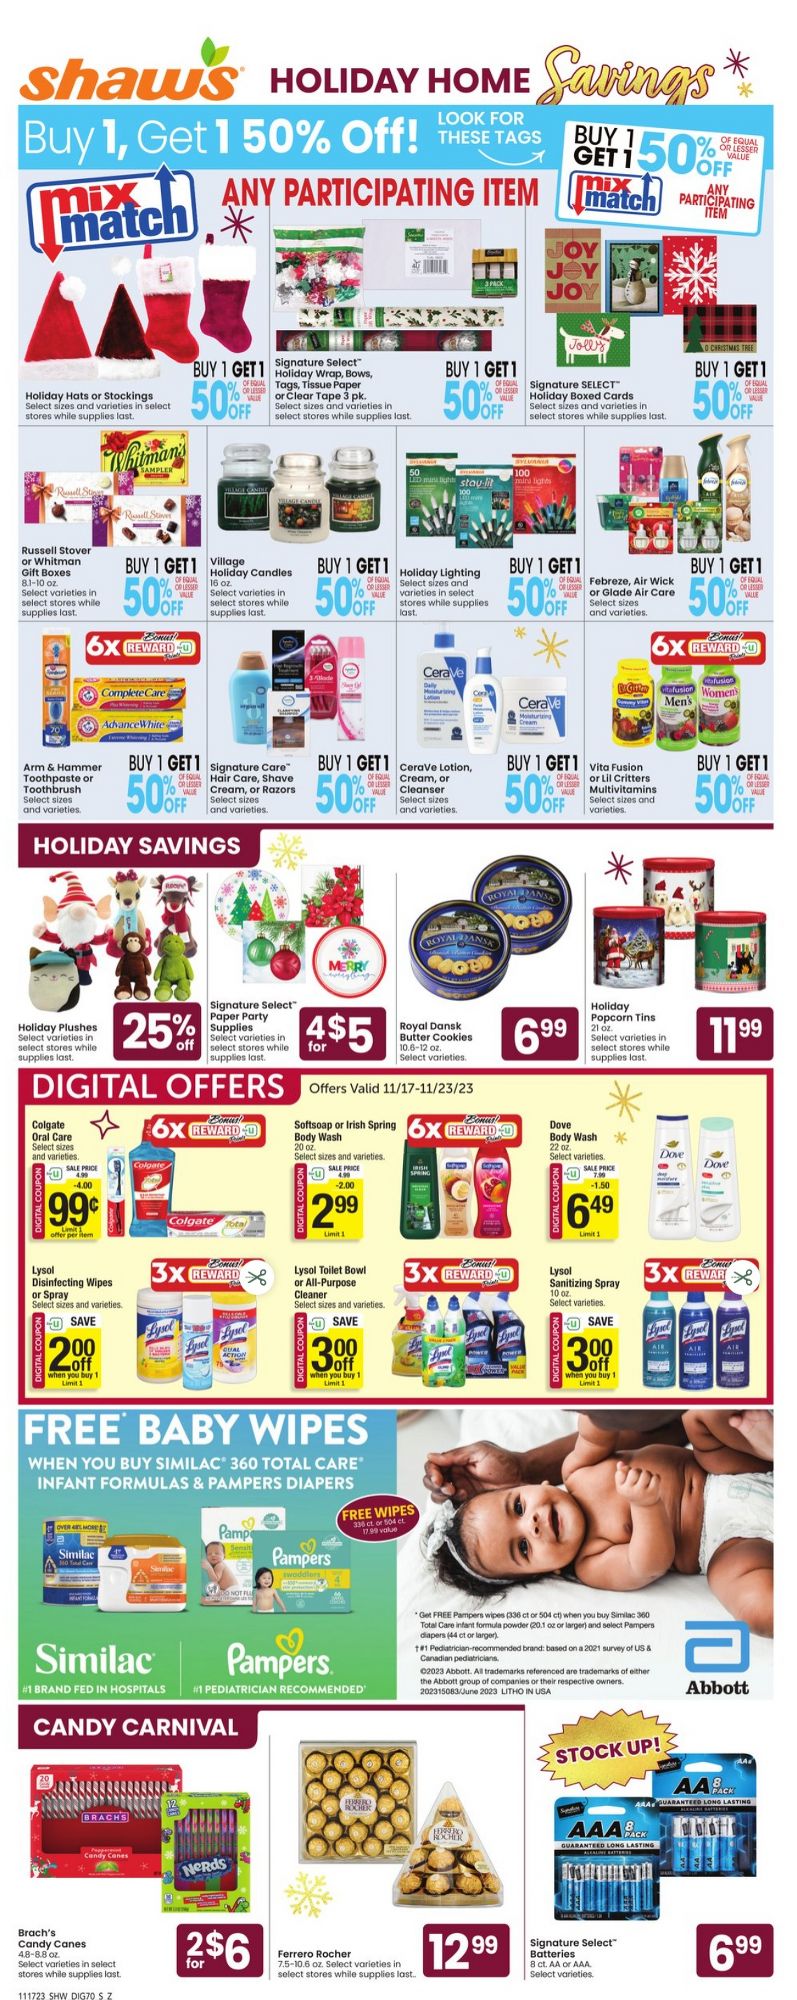 Shaw's Black Friday July 2024 Weekly Sales, Deals, Discounts and Digital Coupons.